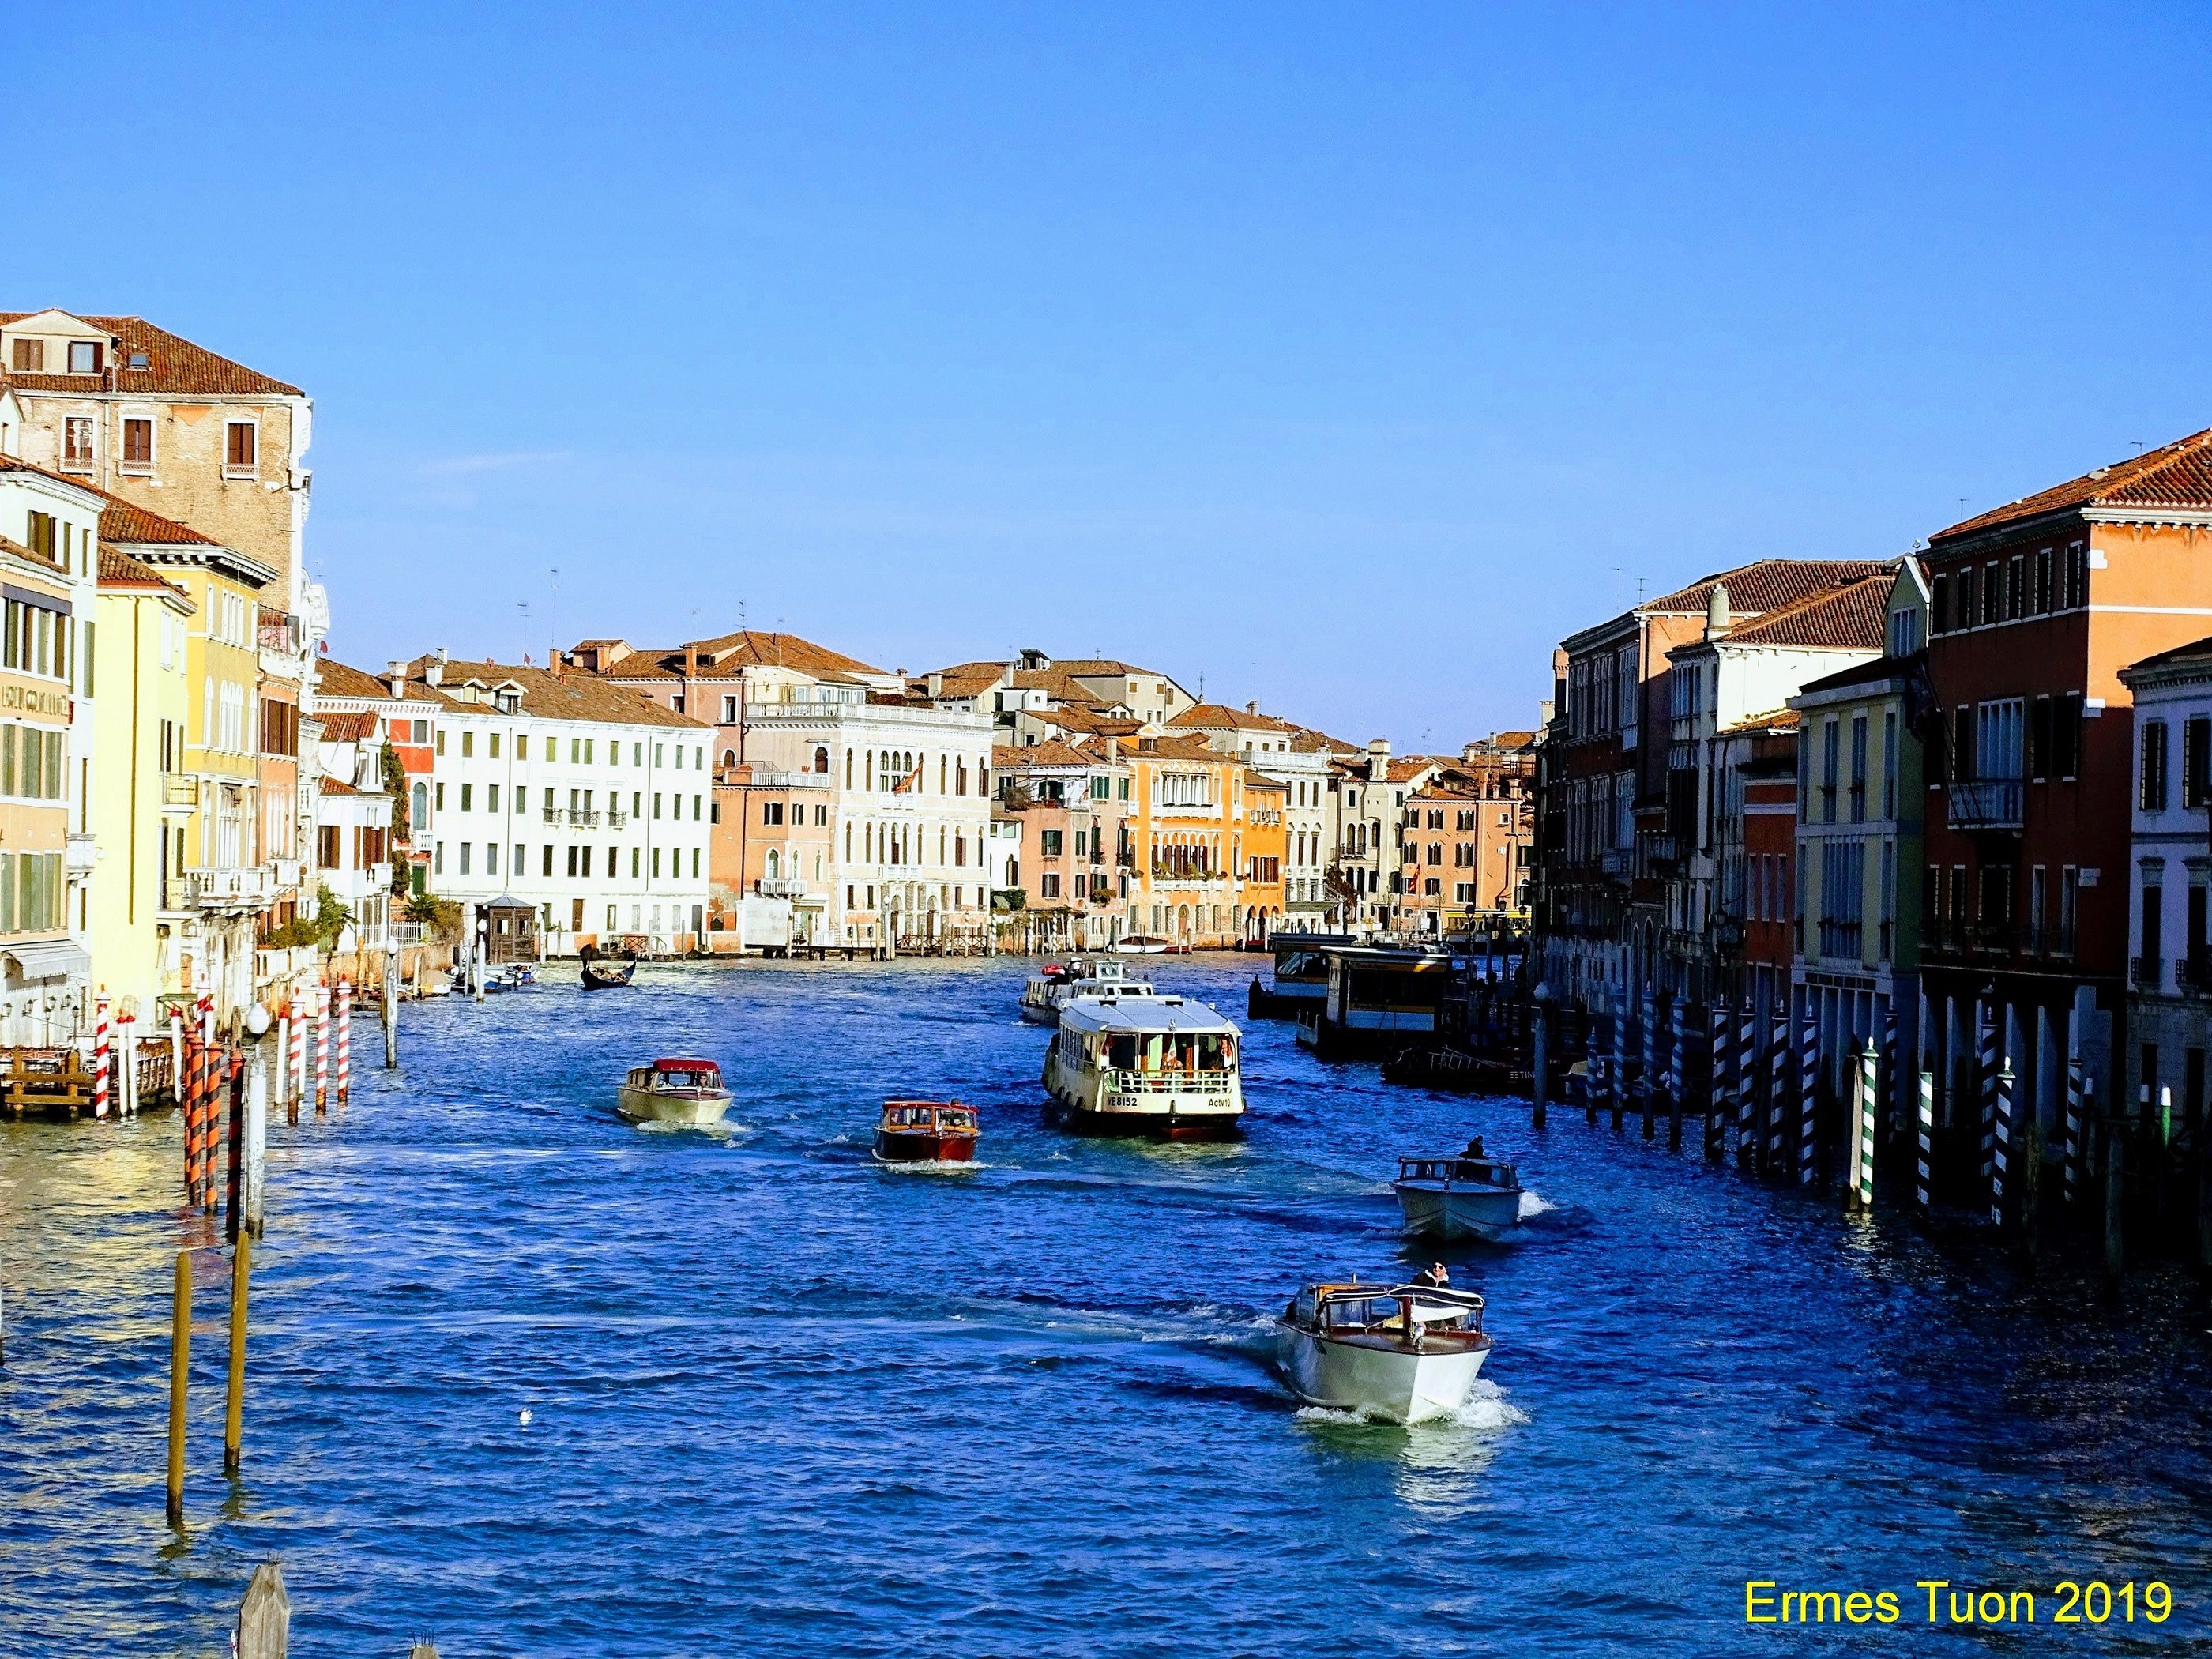 Caption: Venice - The Grand Canal - Local guides @ermest